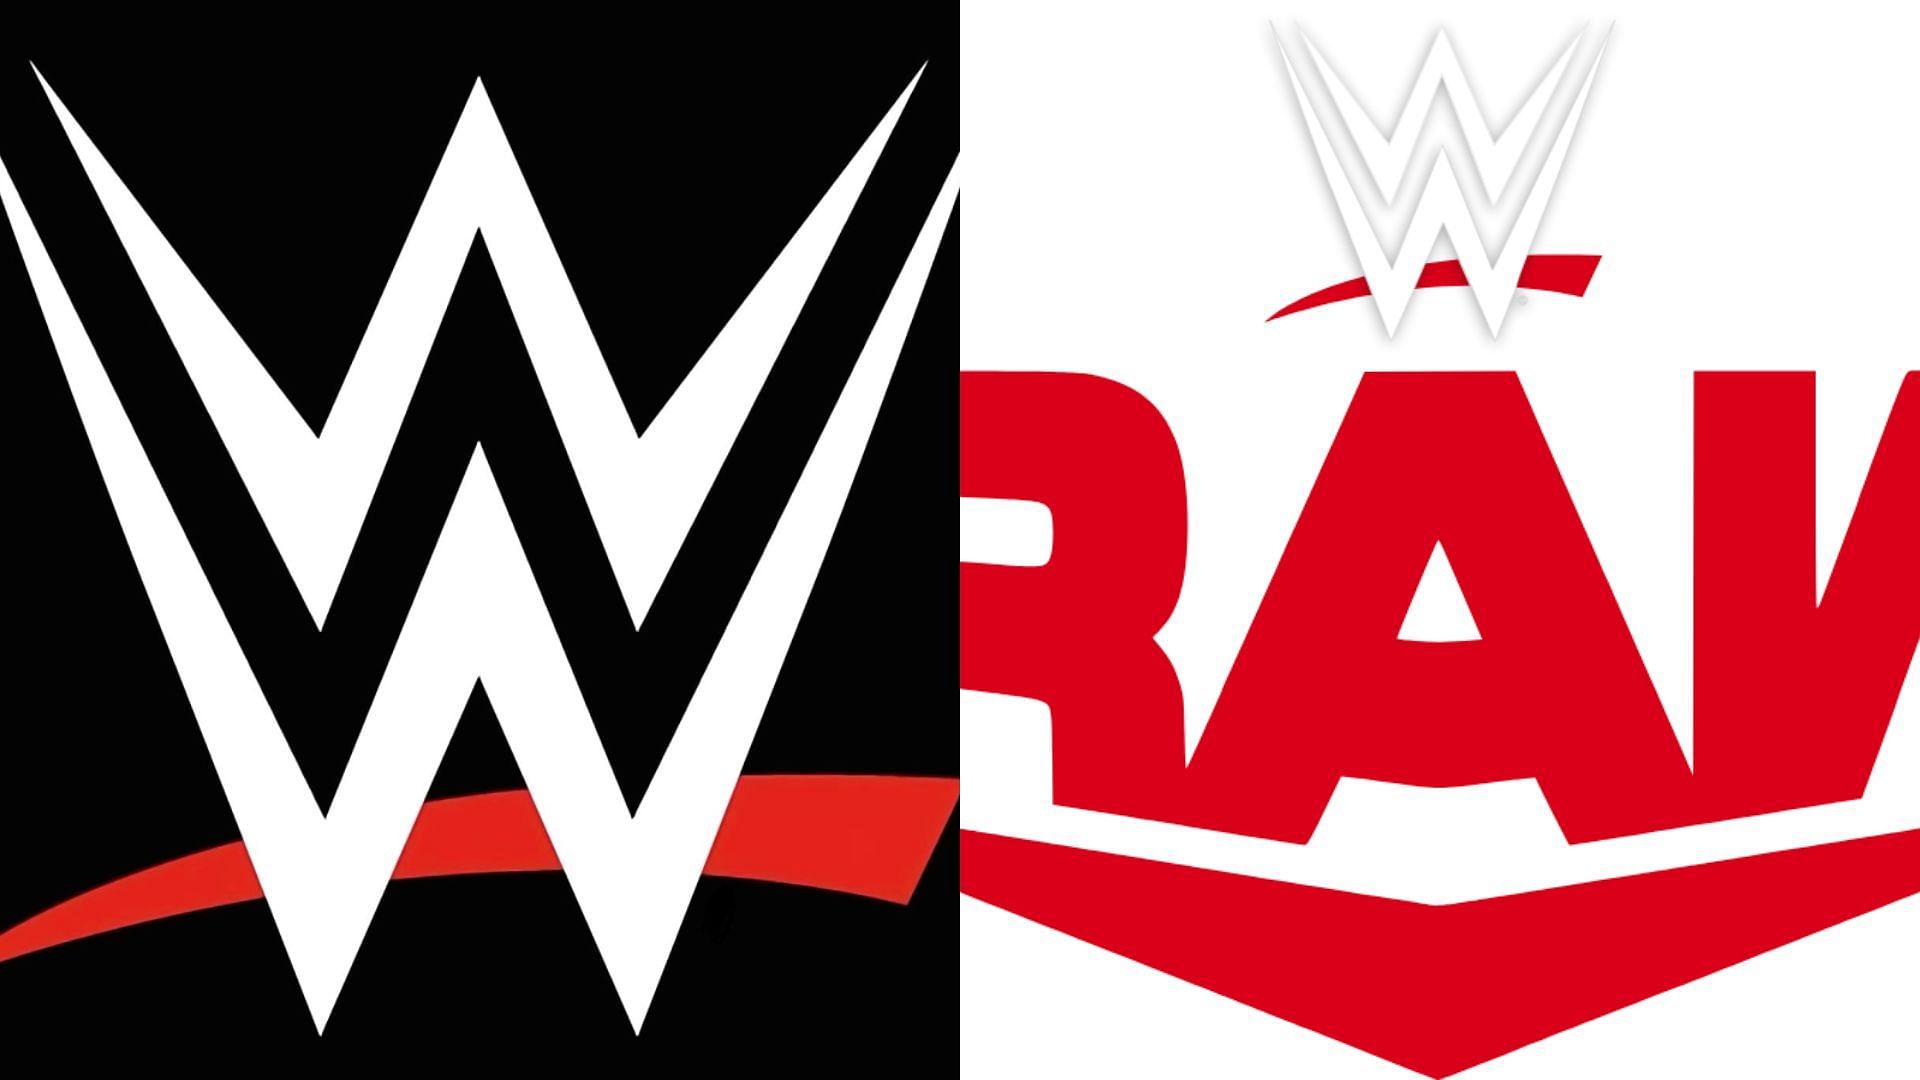 The champions in question were in action on WWE RAW